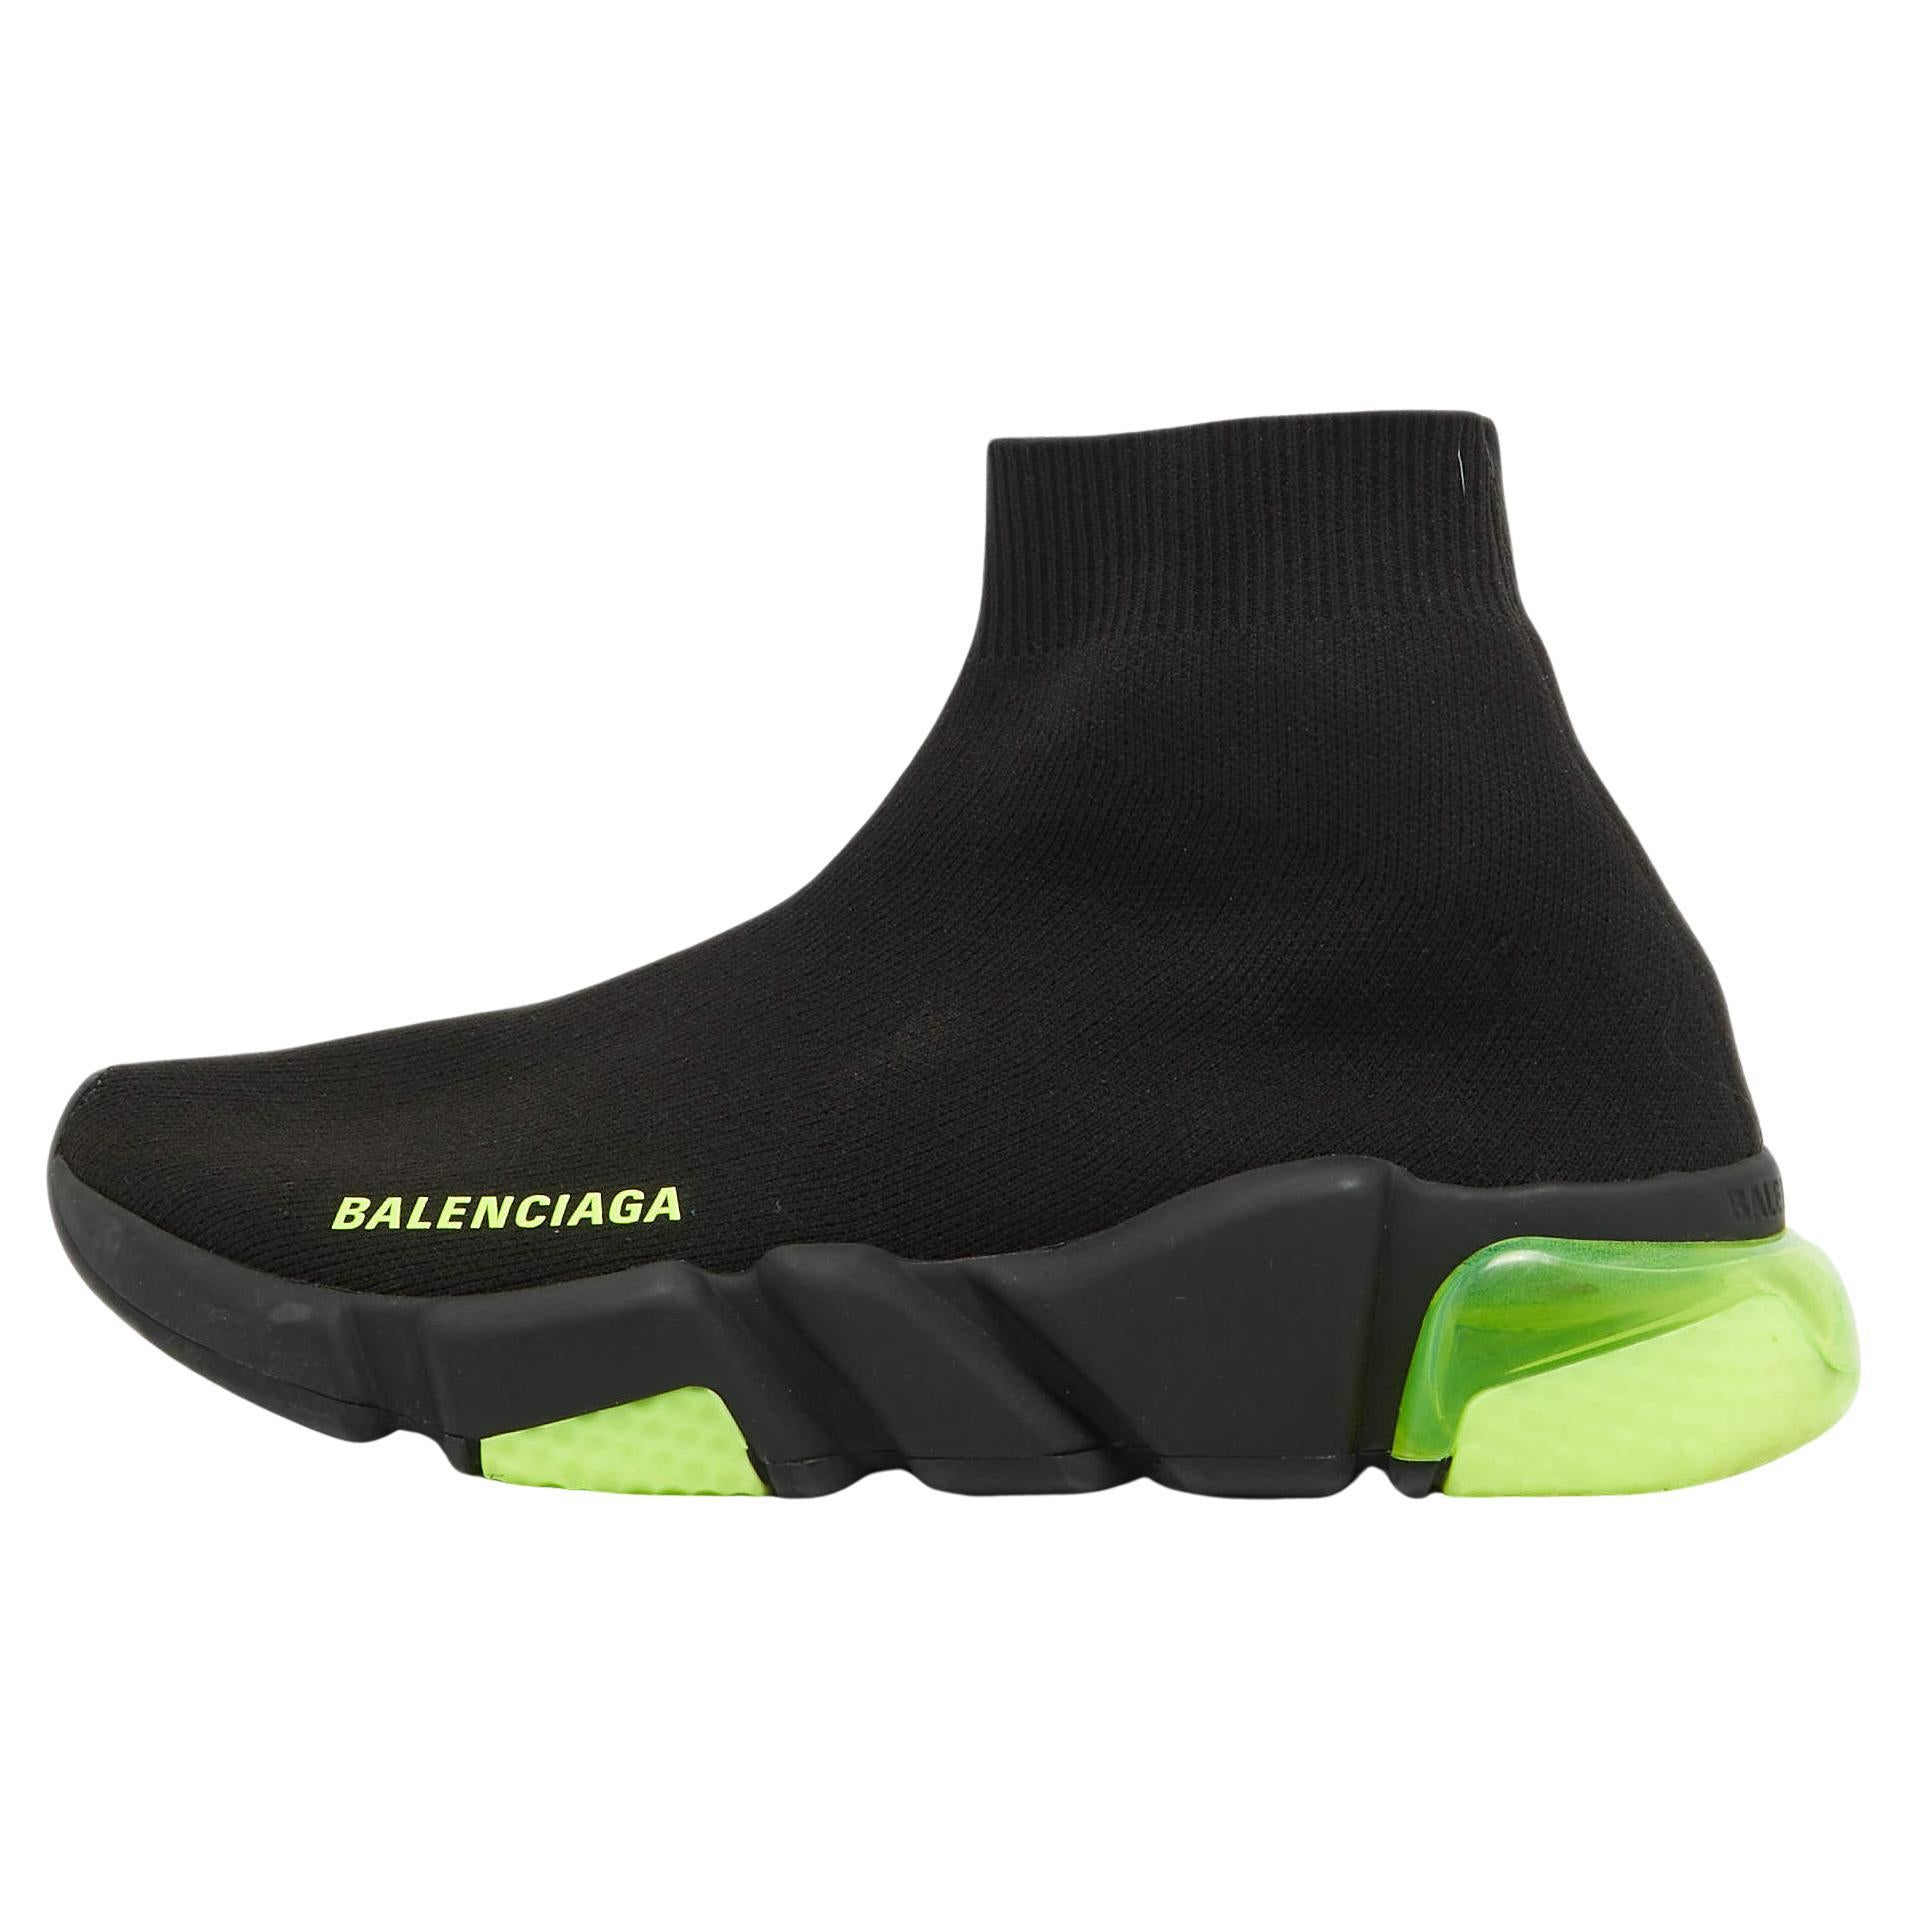 Are Balenciaga runners true to size?